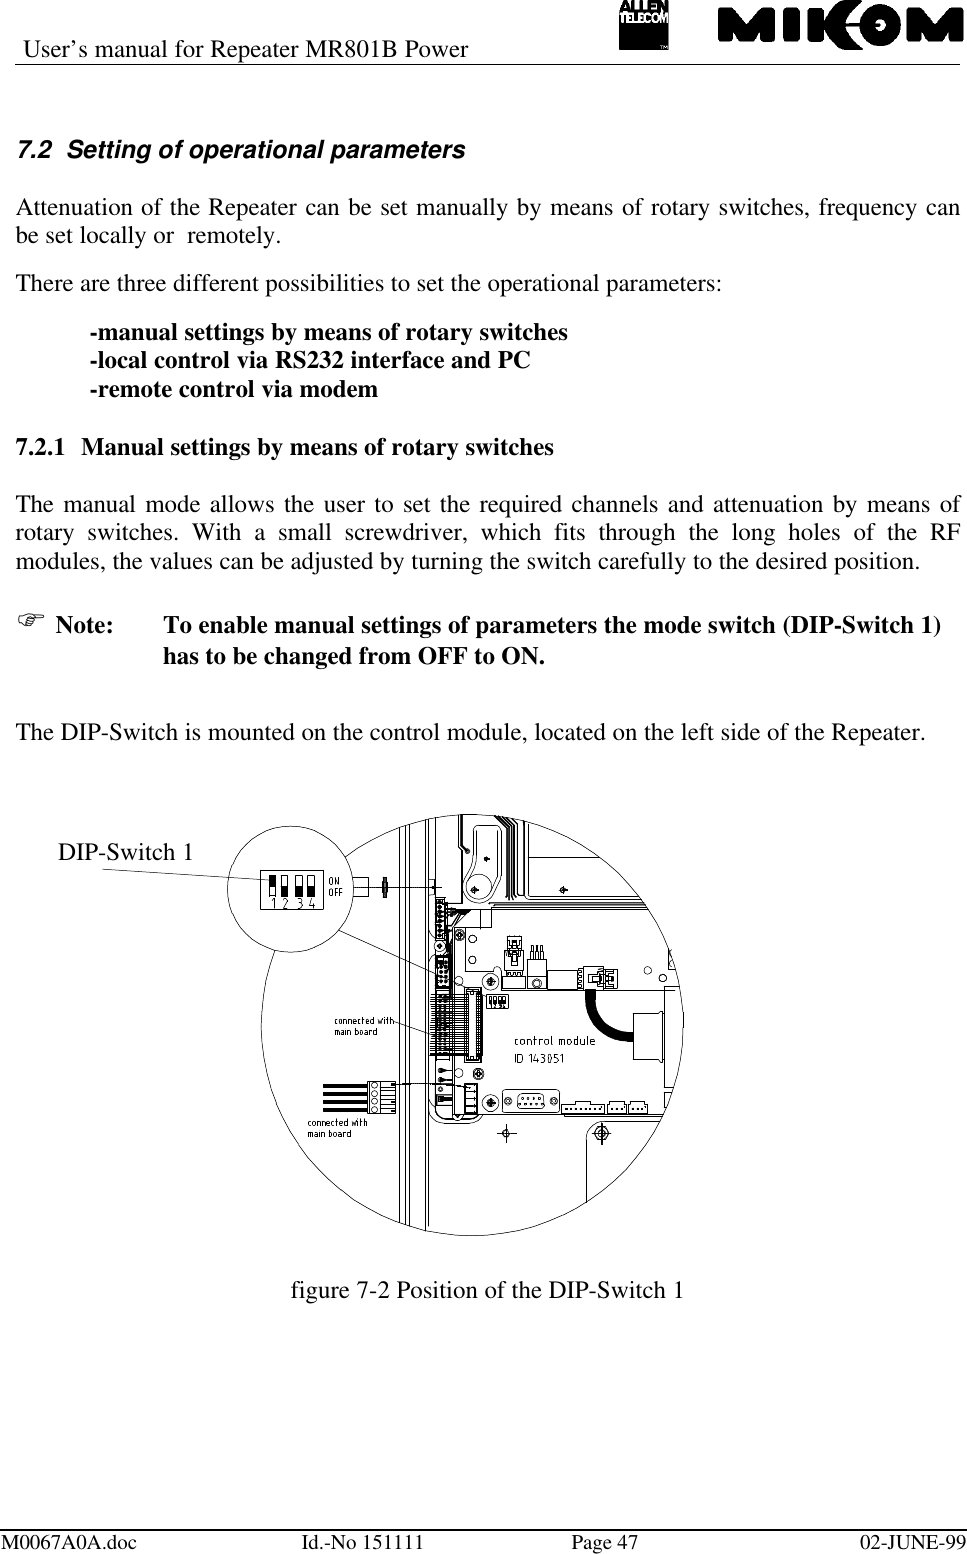 User’s manual for Repeater MR801B PowerM0067A0A.doc Id.-No 151111 Page 47 02-JUNE-997.2 Setting of operational parametersAttenuation of the Repeater can be set manually by means of rotary switches, frequency canbe set locally or  remotely.There are three different possibilities to set the operational parameters:-manual settings by means of rotary switches-local control via RS232 interface and PC-remote control via modem7.2.1 Manual settings by means of rotary switchesThe manual mode allows the user to set the required channels and attenuation by means ofrotary switches. With a small screwdriver, which fits through the long holes of the RFmodules, the values can be adjusted by turning the switch carefully to the desired position.F Note: To enable manual settings of parameters the mode switch (DIP-Switch 1)has to be changed from OFF to ON.The DIP-Switch is mounted on the control module, located on the left side of the Repeater.figure 7-2 Position of the DIP-Switch 1DIP-Switch 1